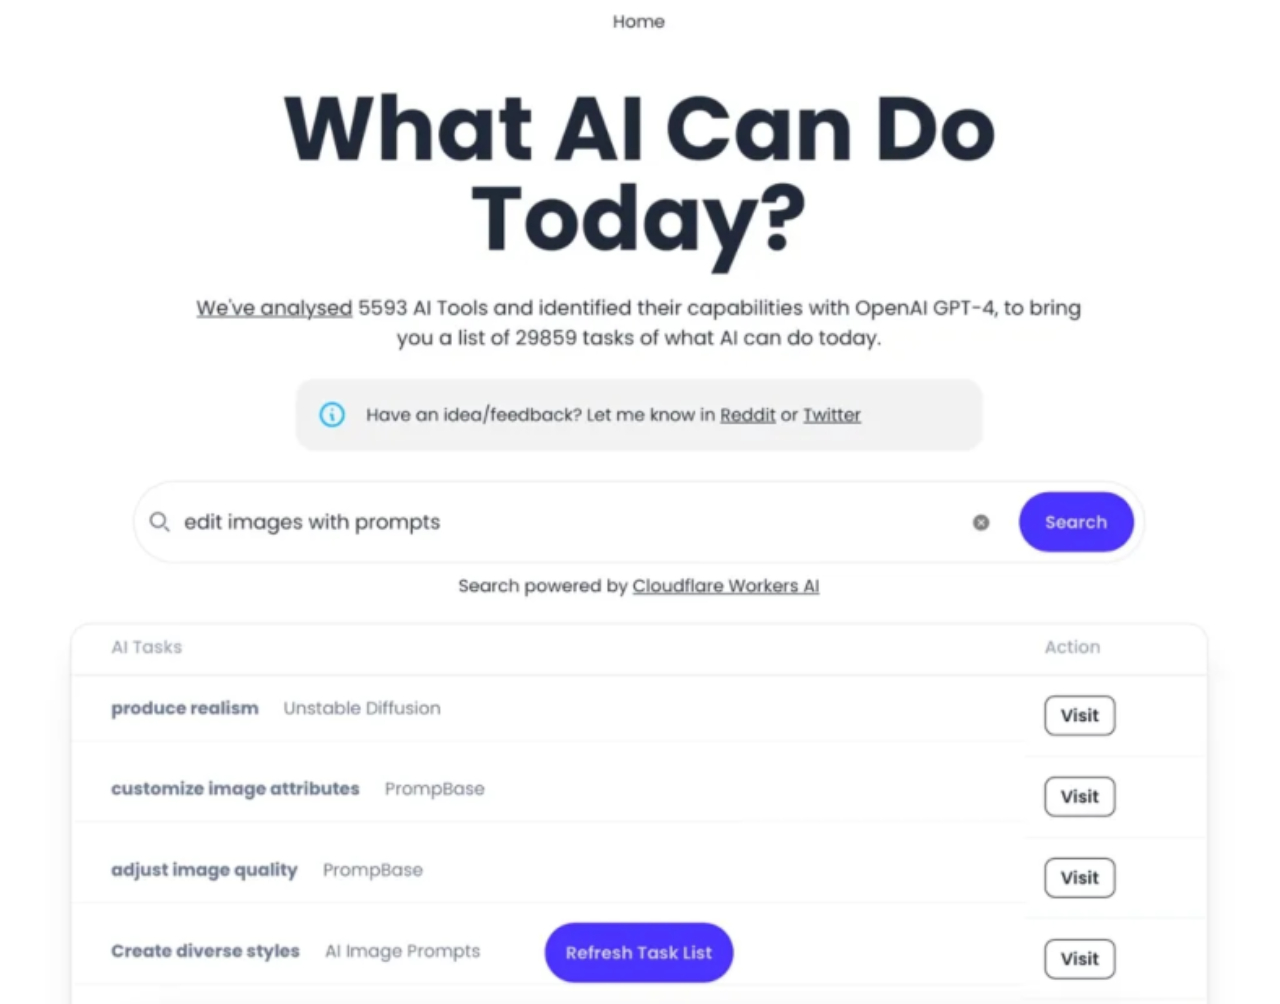 what can ai do today